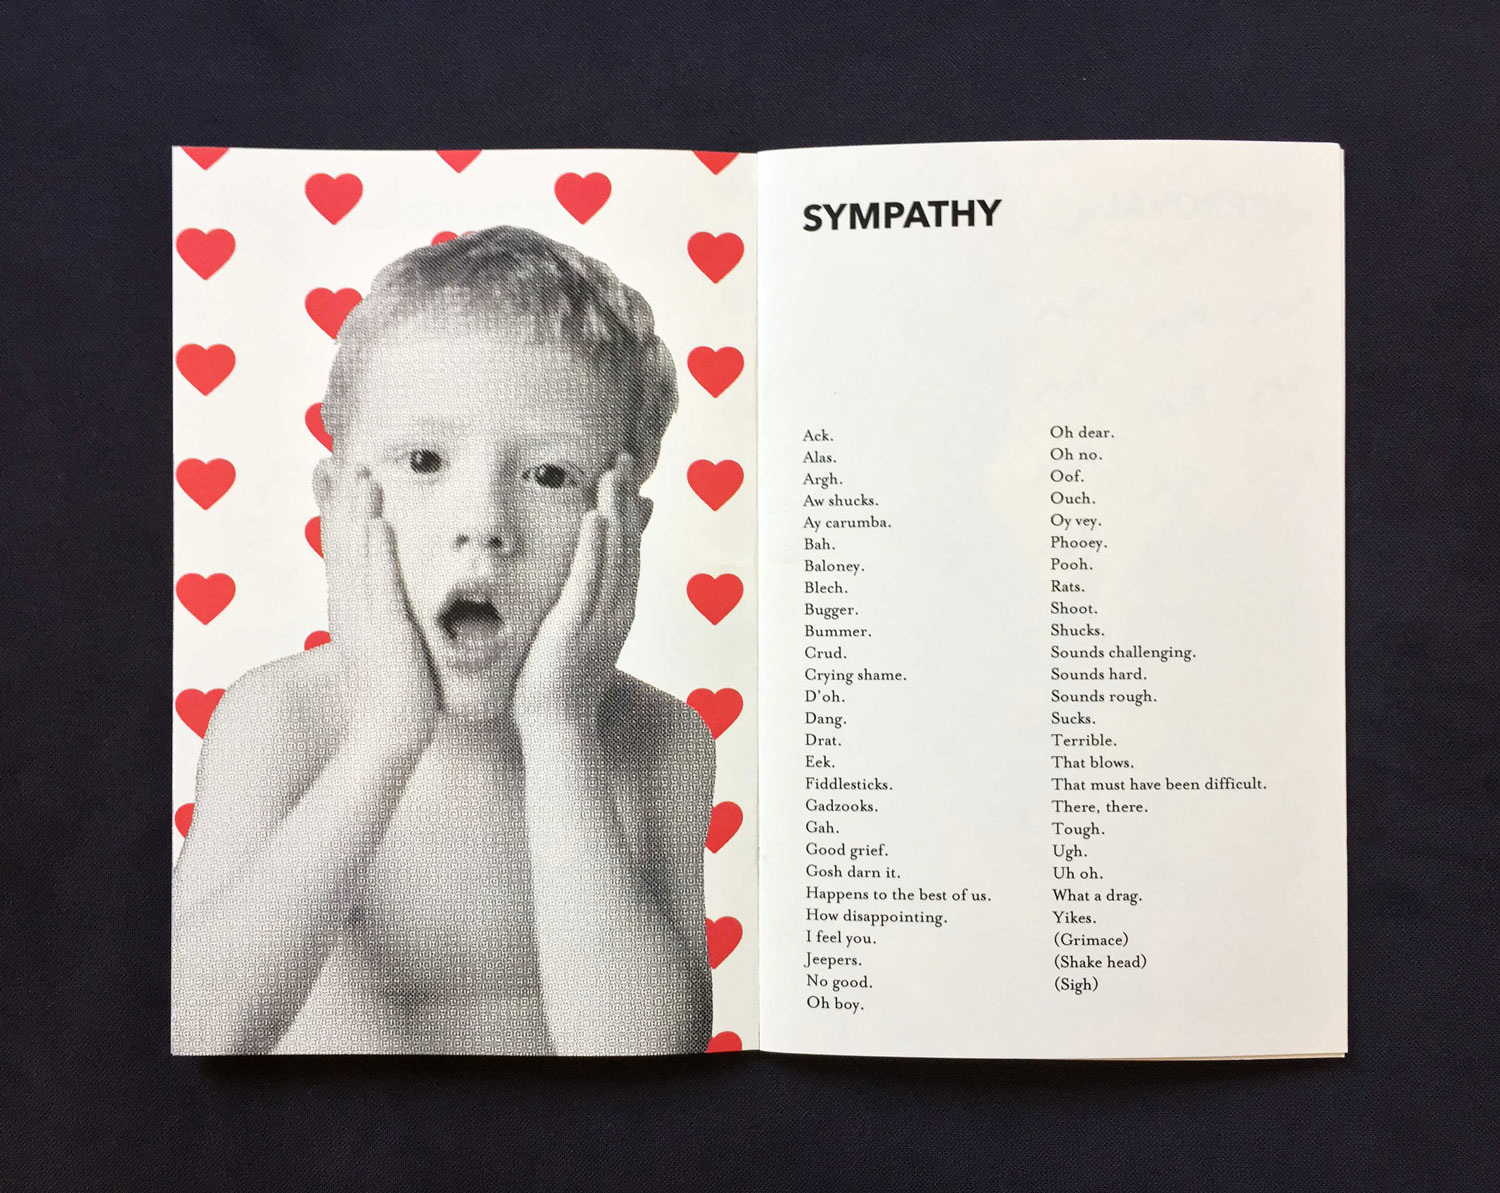 Interior spread of a section titled Sympathy, featuring a young boy with his hands on his cheeks, making a sympathetic face